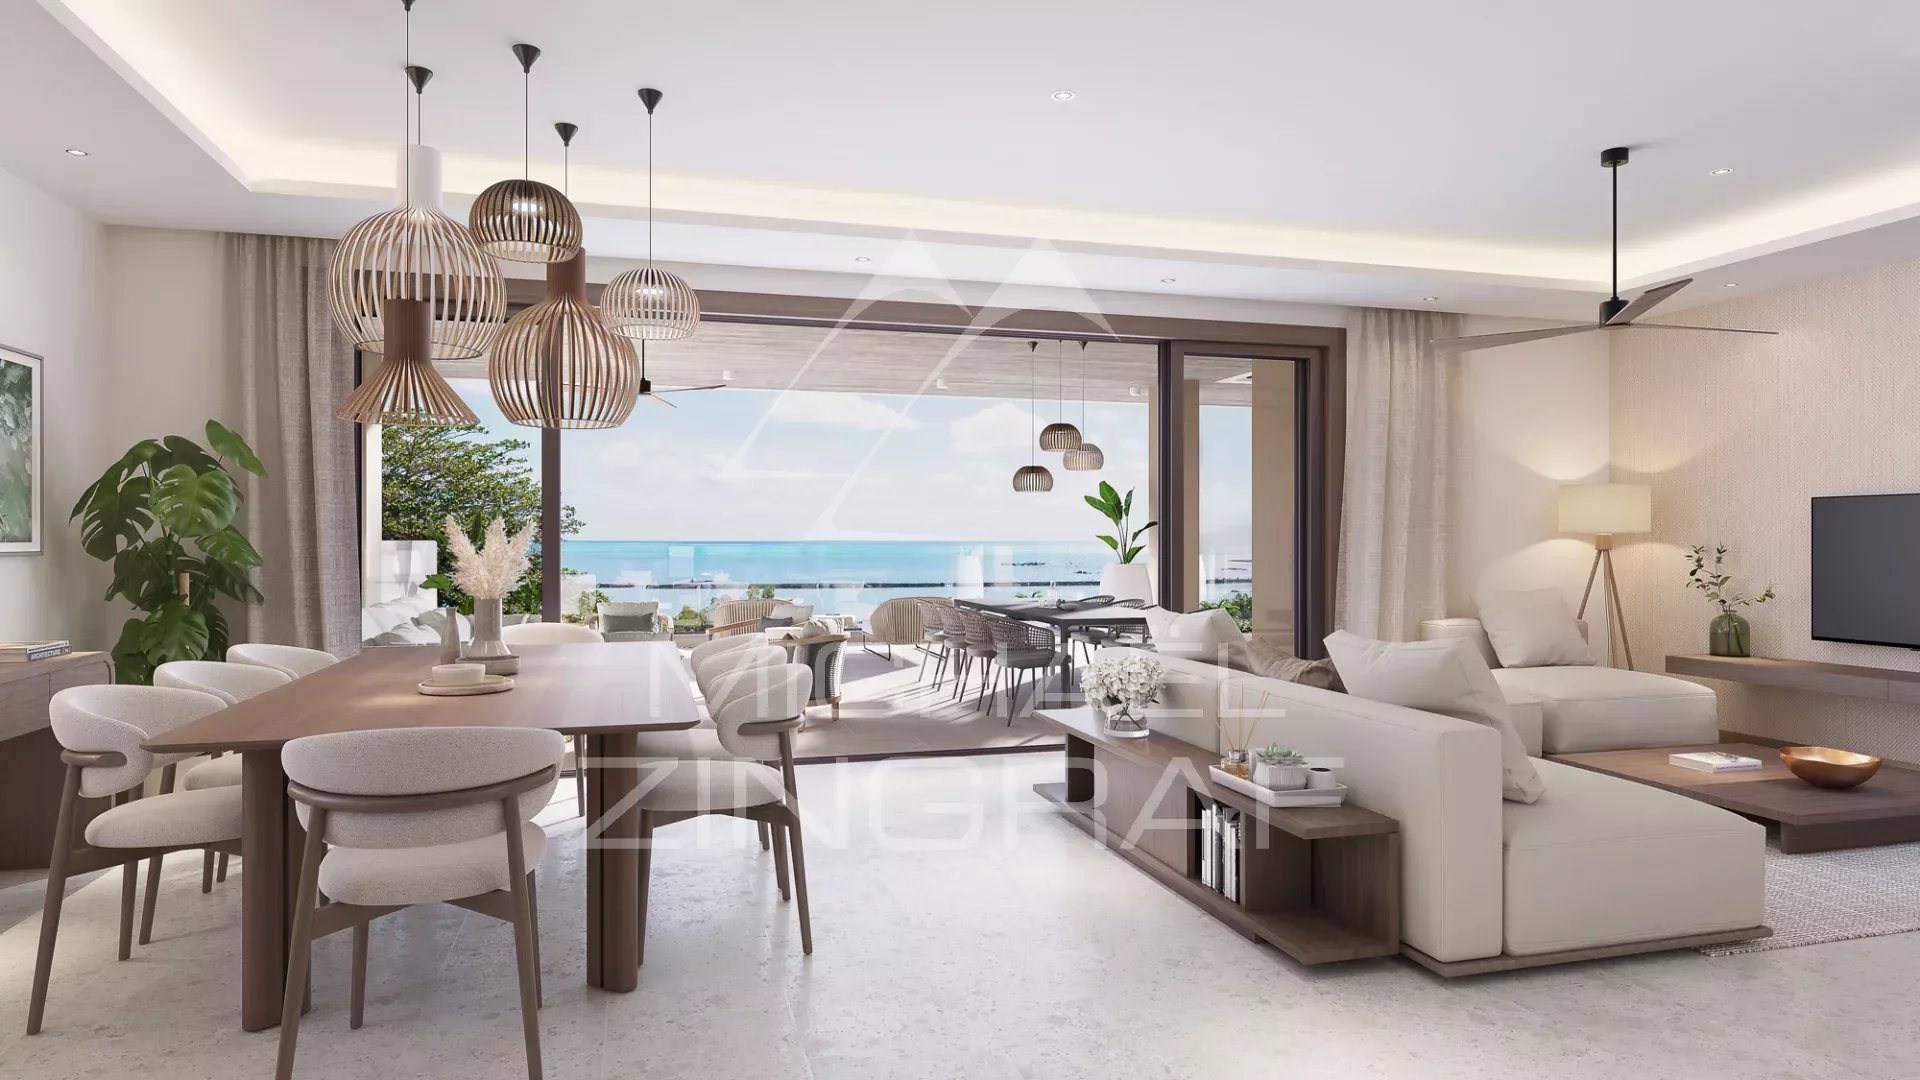 4 bedrooms Penthouse in a seaside residence